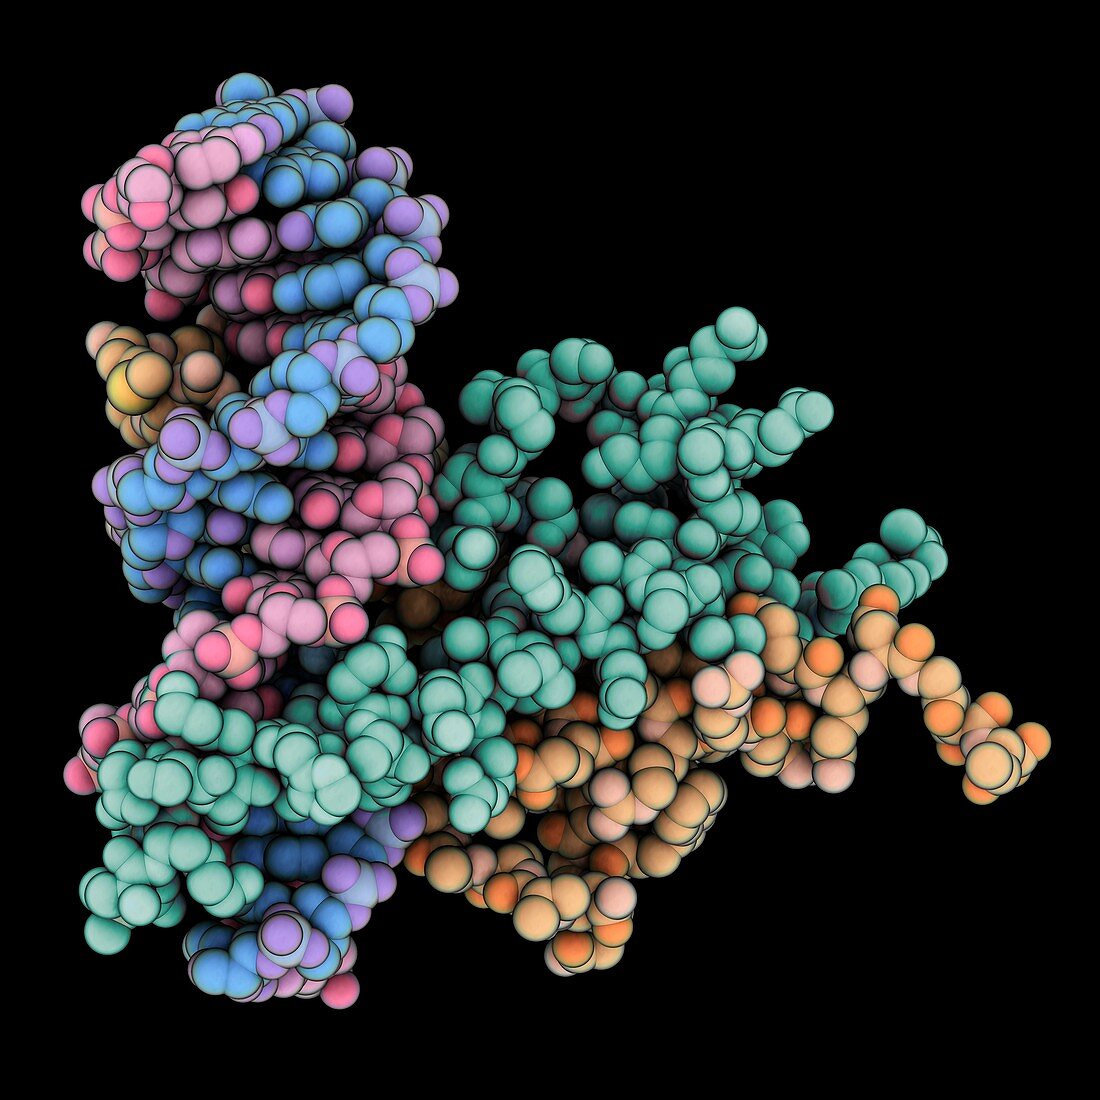 Regulatory protein complexed with DNA